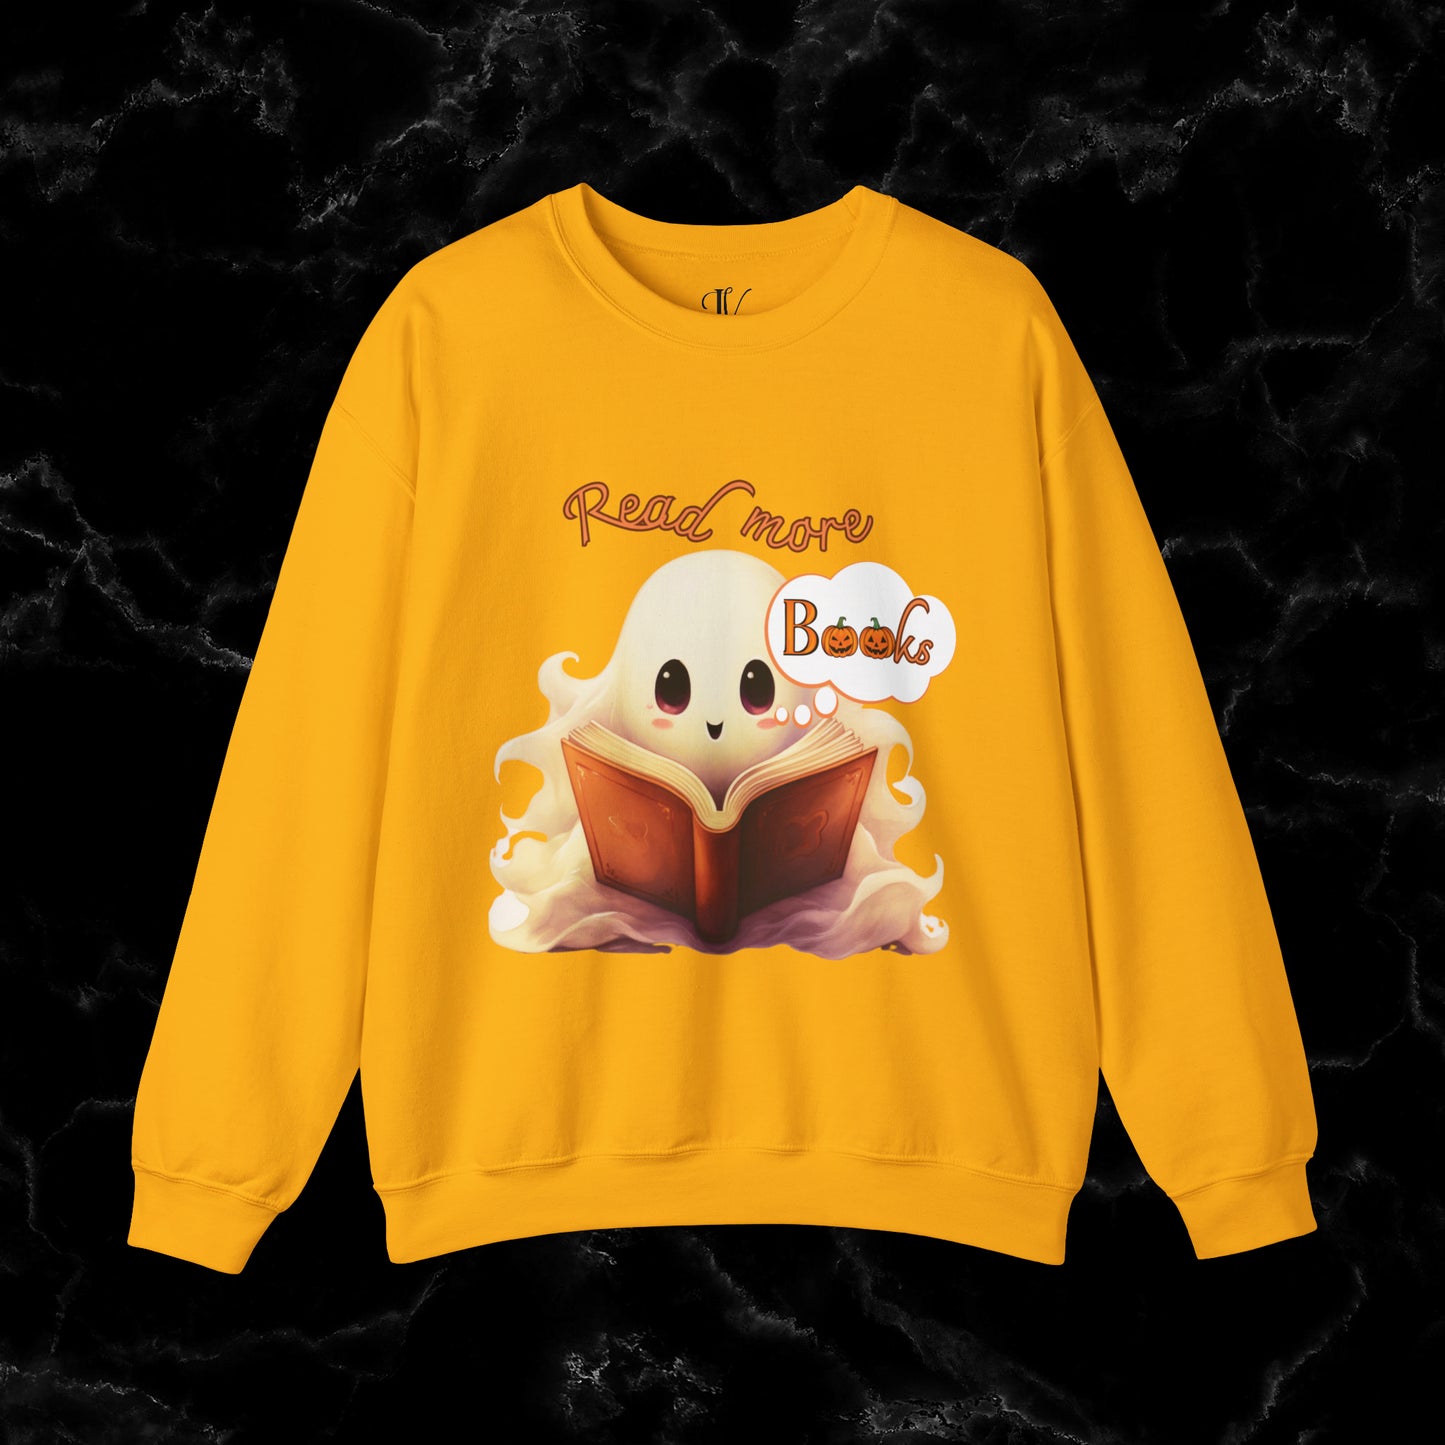 Read More Books Sweatshirt - Book Lover Halloween Sweater for Librarians and Students Sweatshirt S Gold 